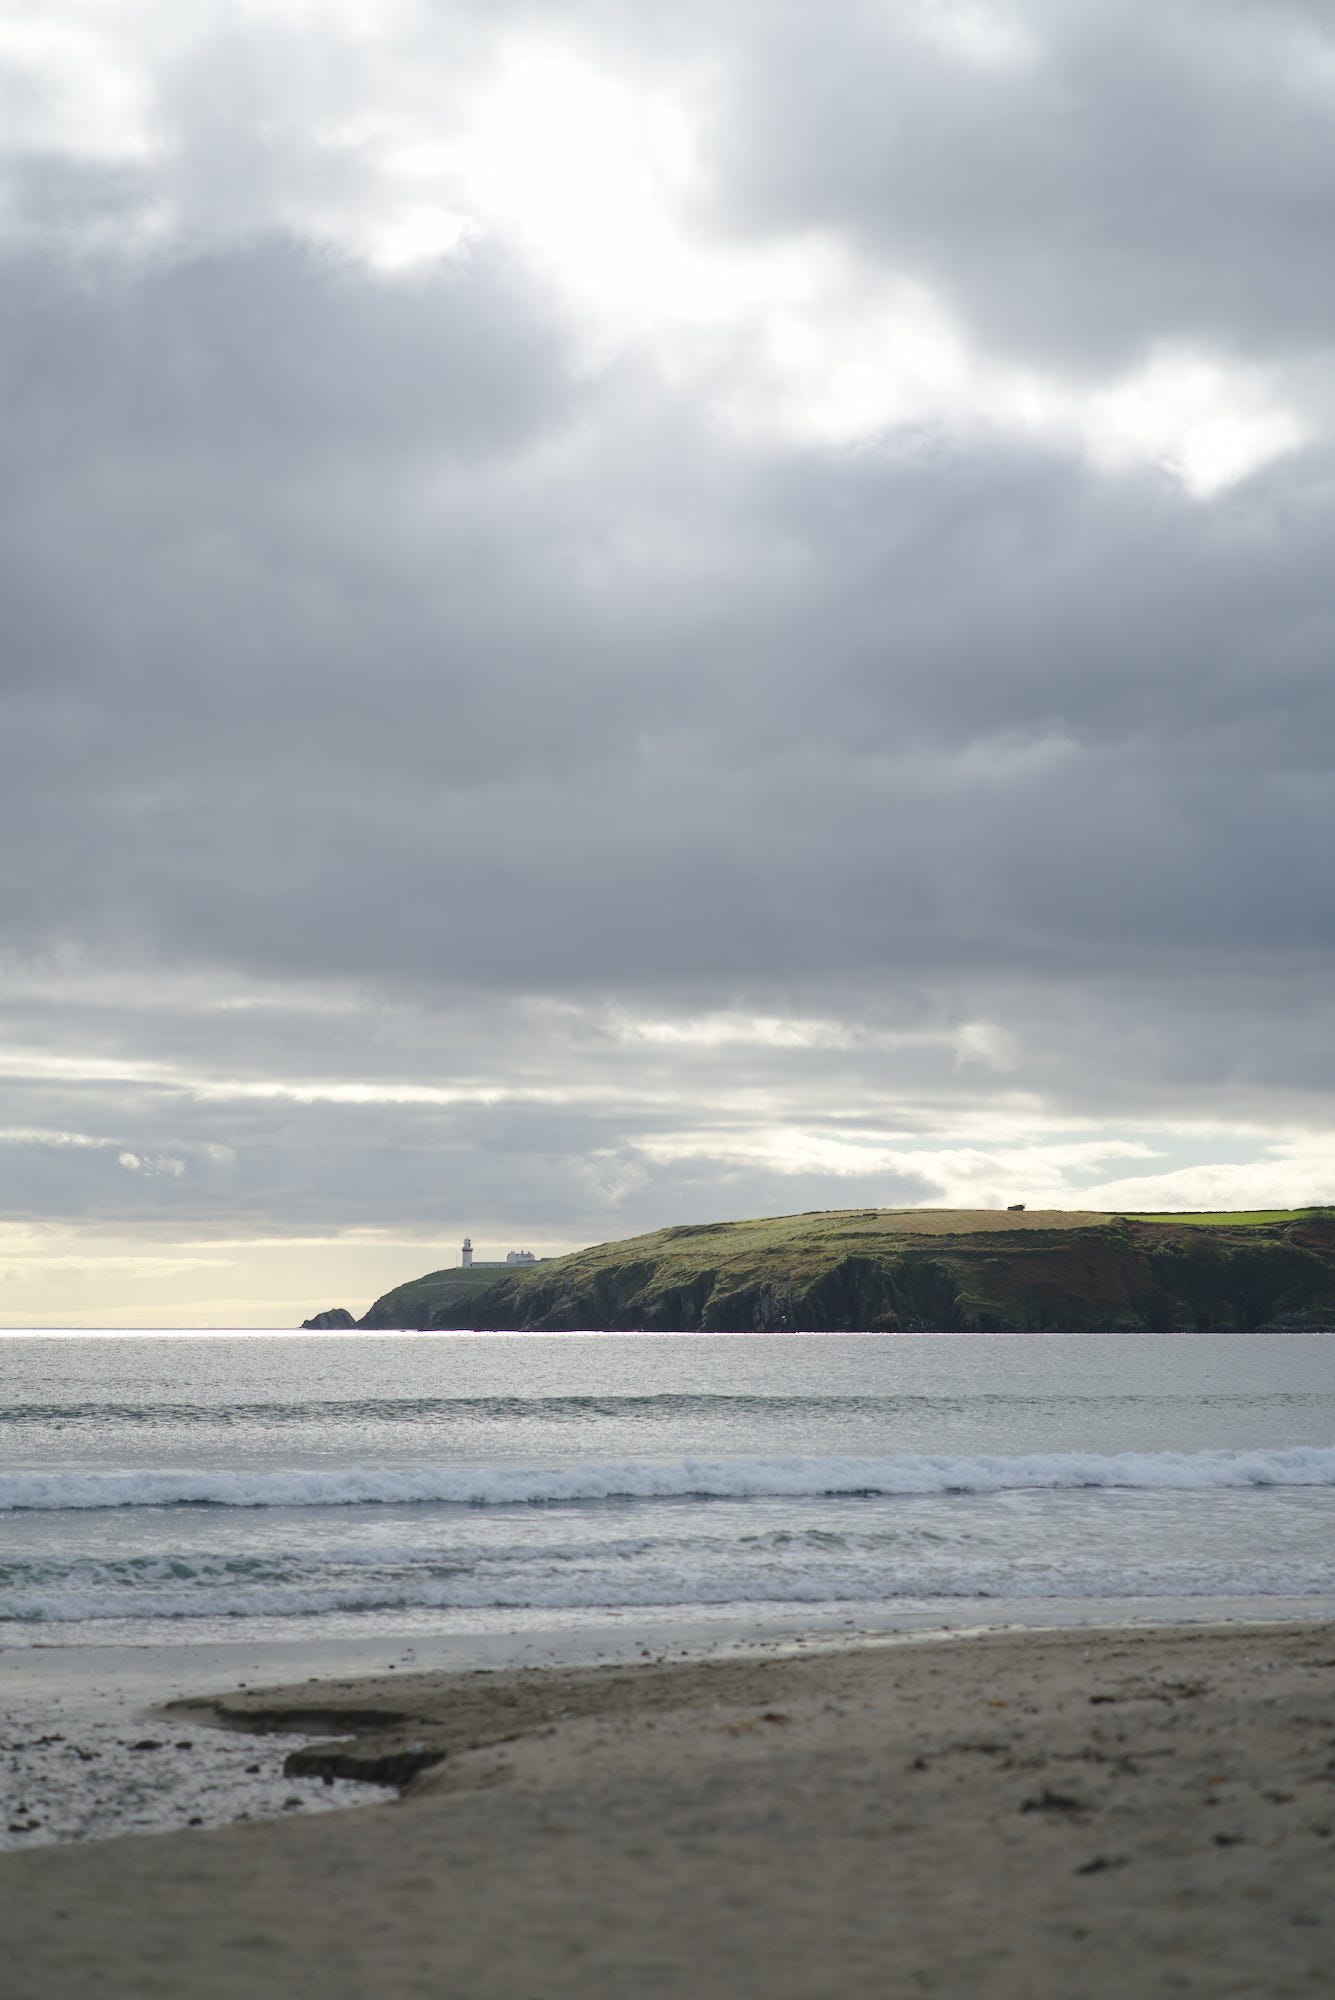 Galley Head Lighthouse from Red Strand Beach. One of the many beacons of Ireland's past (and present) which make you feel an equal beacon of hope for the future.